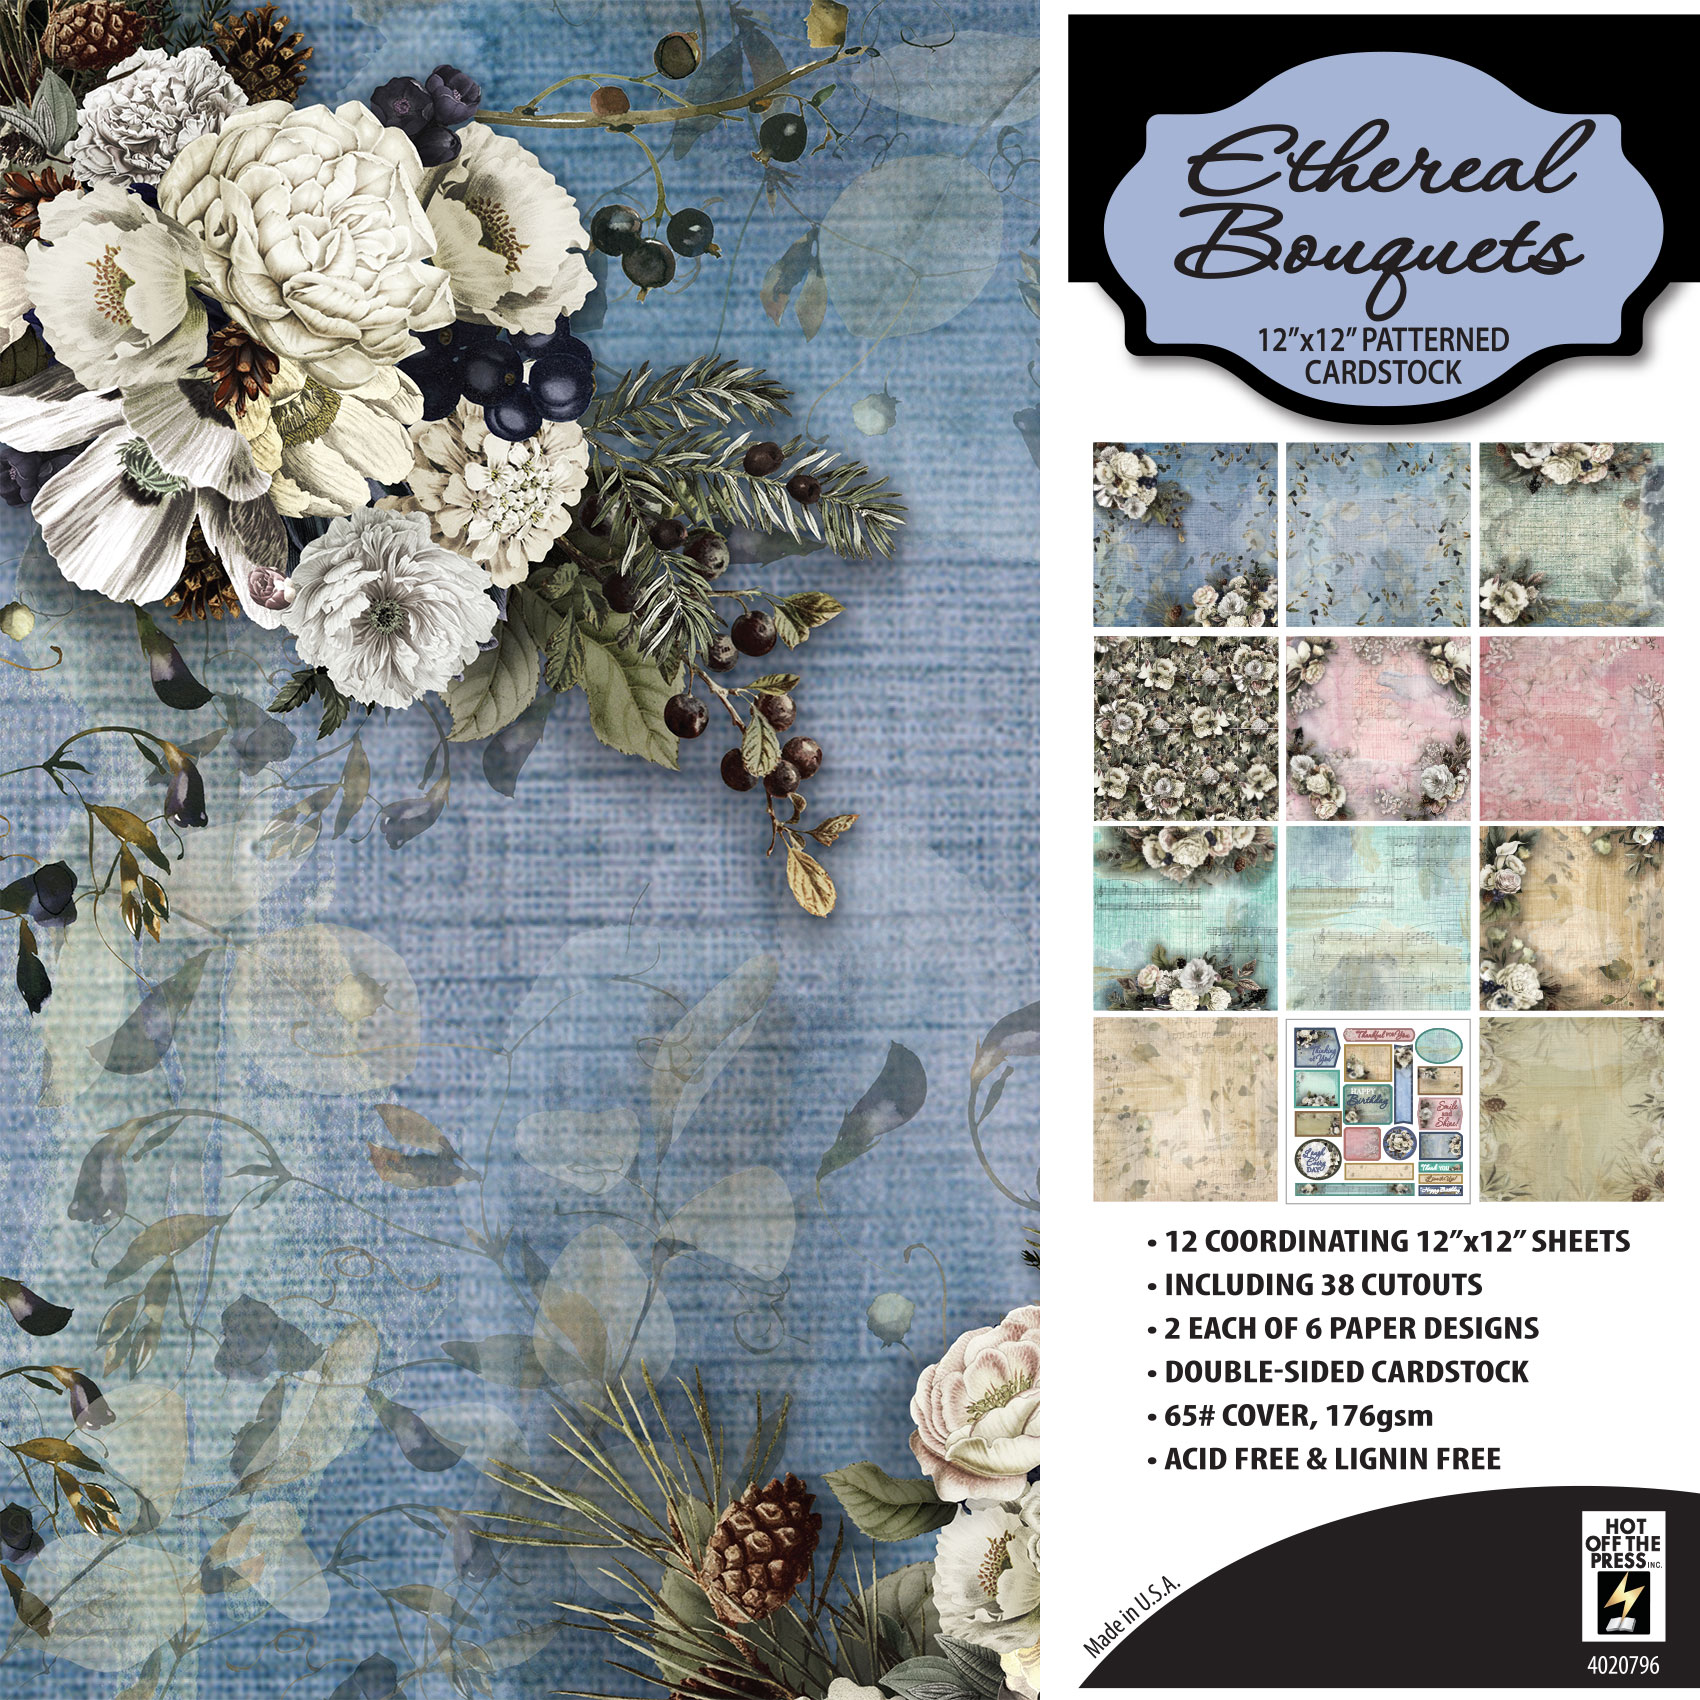 Ethereal Bouquets 12"x12" Patterned Cardstock